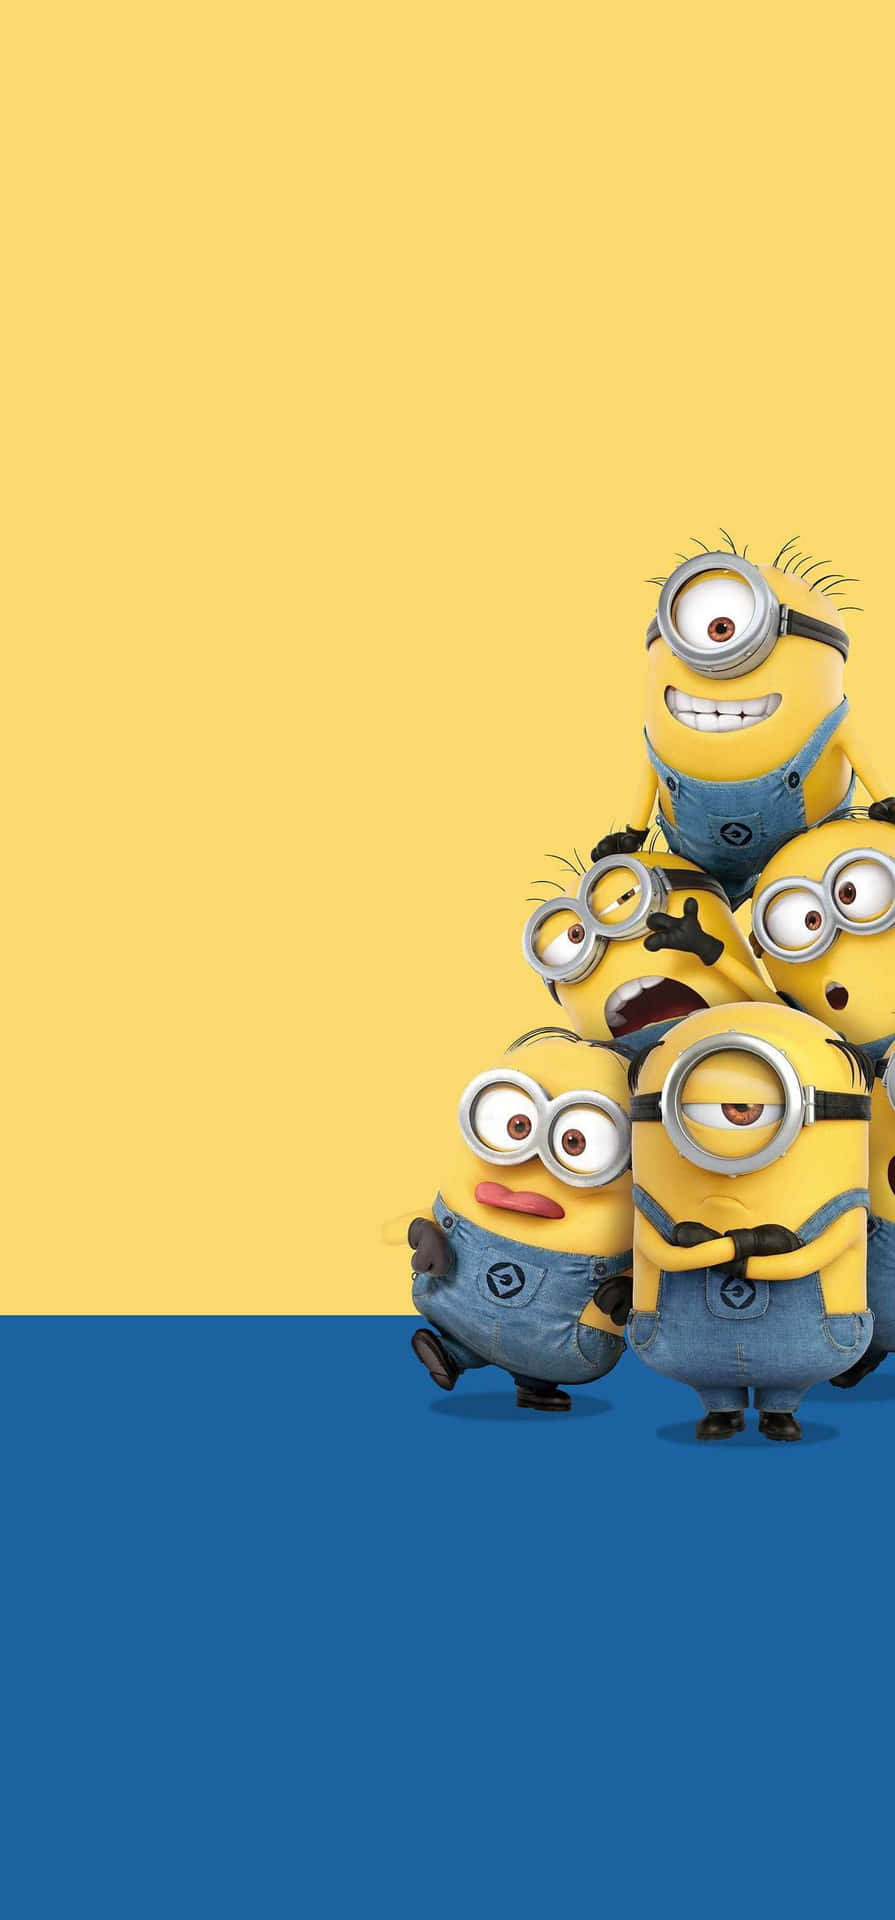 Love fun and adventures with your minions!